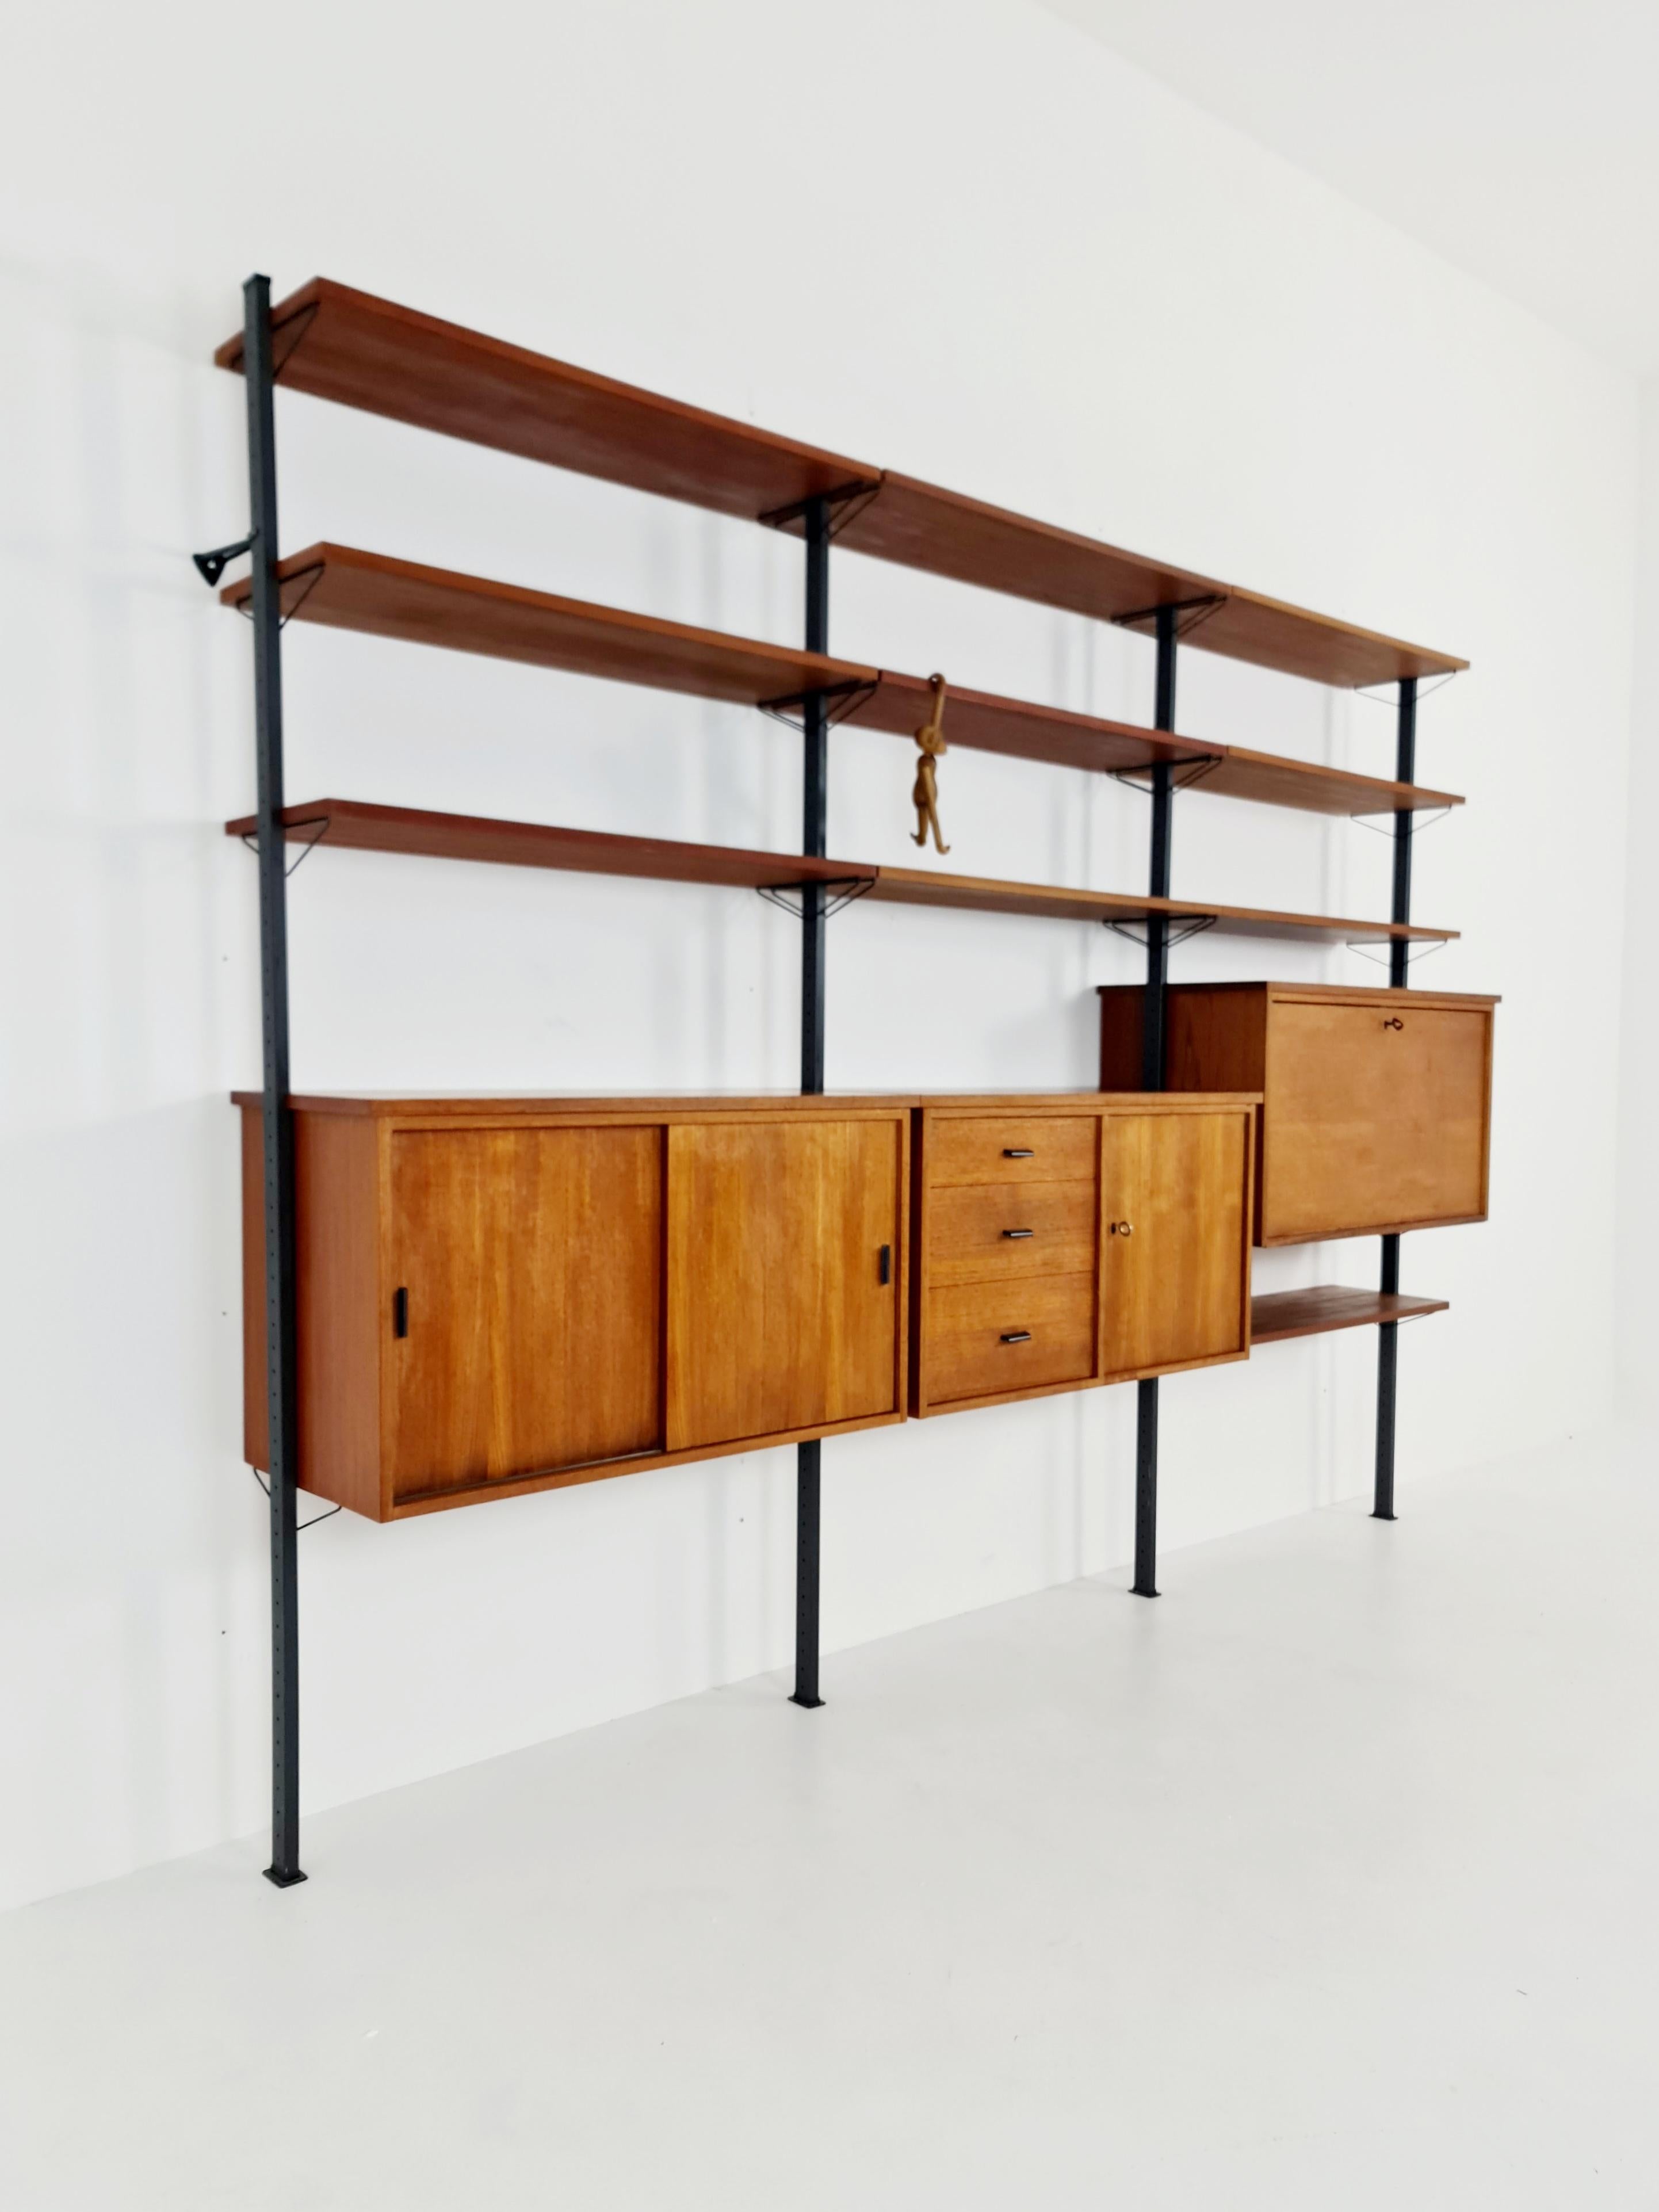 Mid century String shelf system teak & metal by Olof Pira Sweden, 1950s

Measurements:
Height : 200 cm
Width : 283 cm
Depth : 41 cm

Please inquiry for prices to your country before buying.

A wooden crate may be used for intercontinental shipments